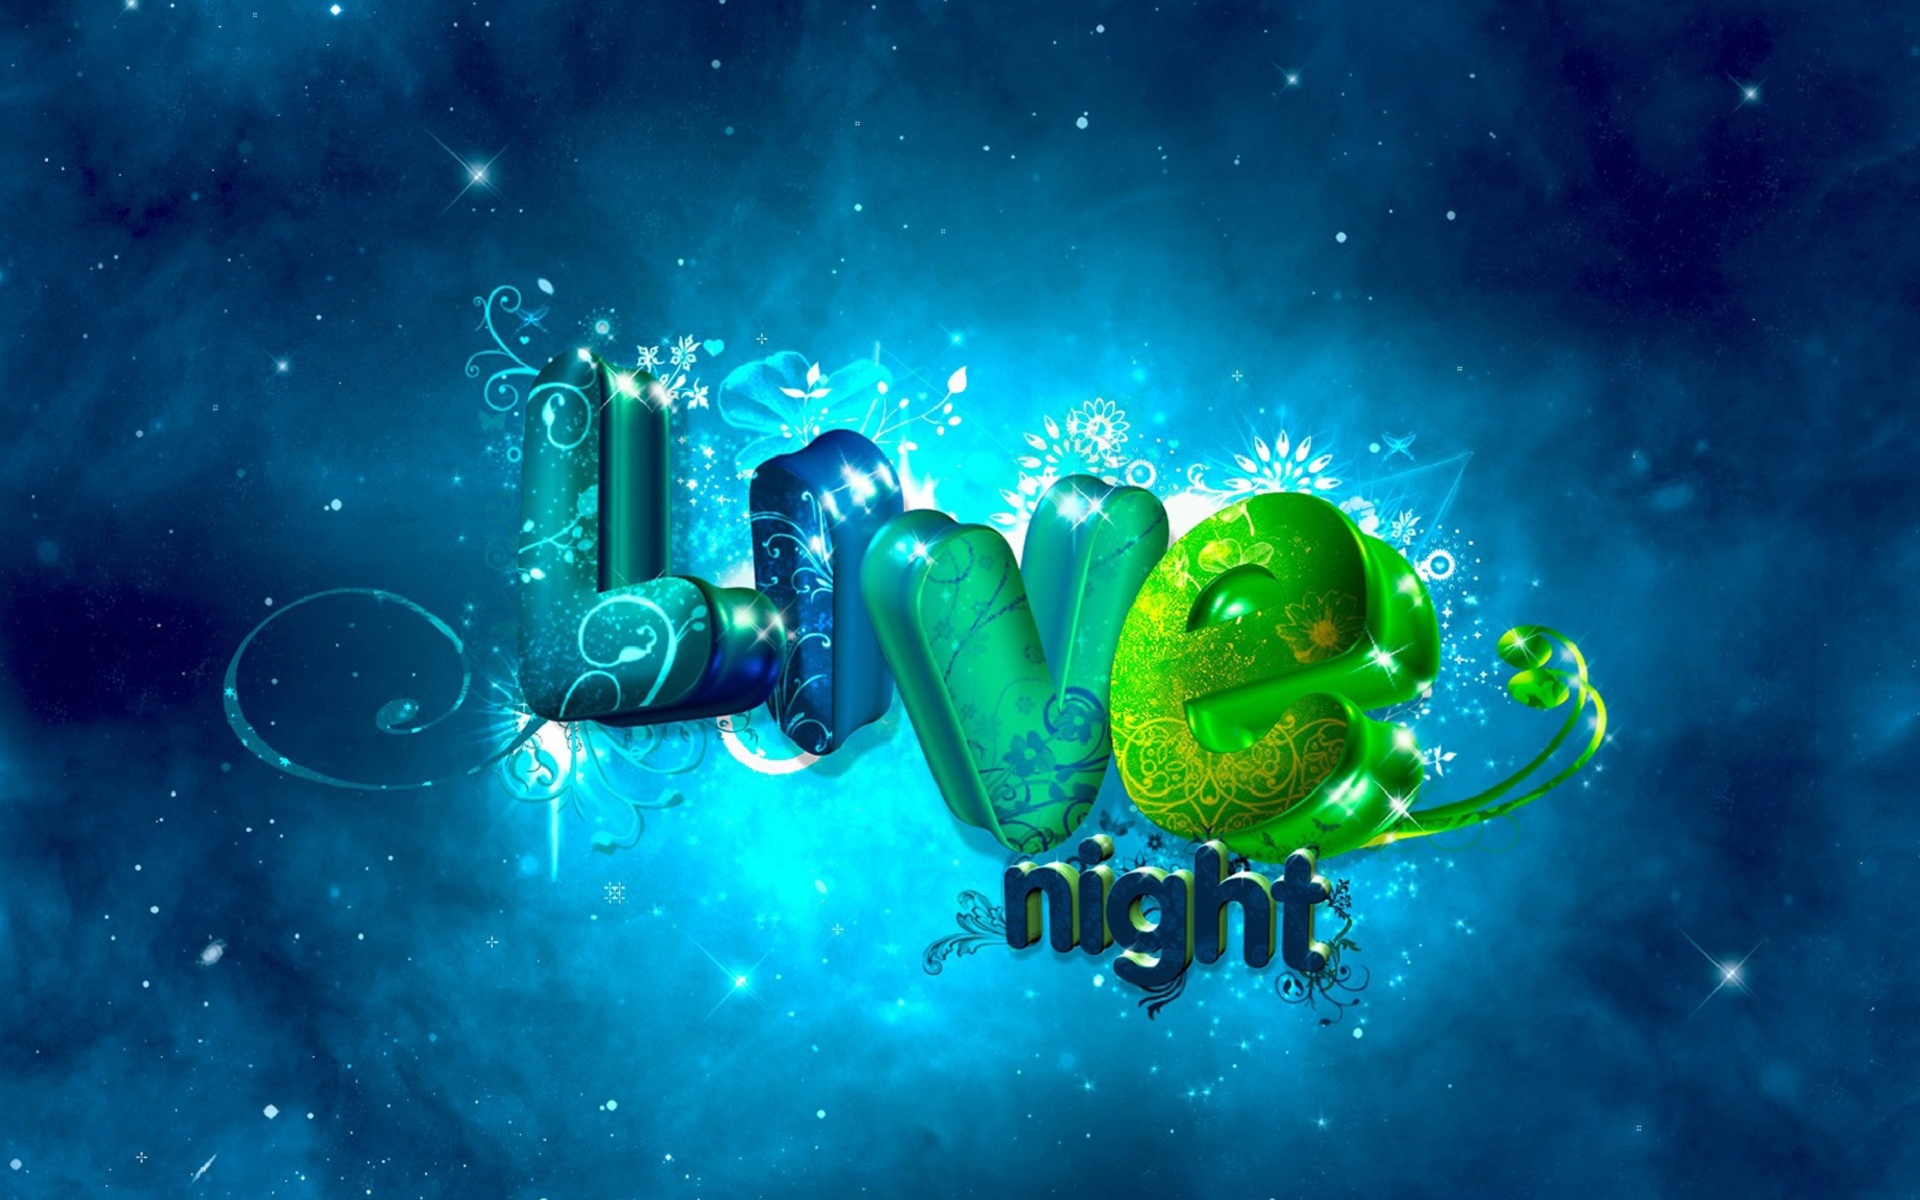 Live Night Wallpapers HD Wallpapers